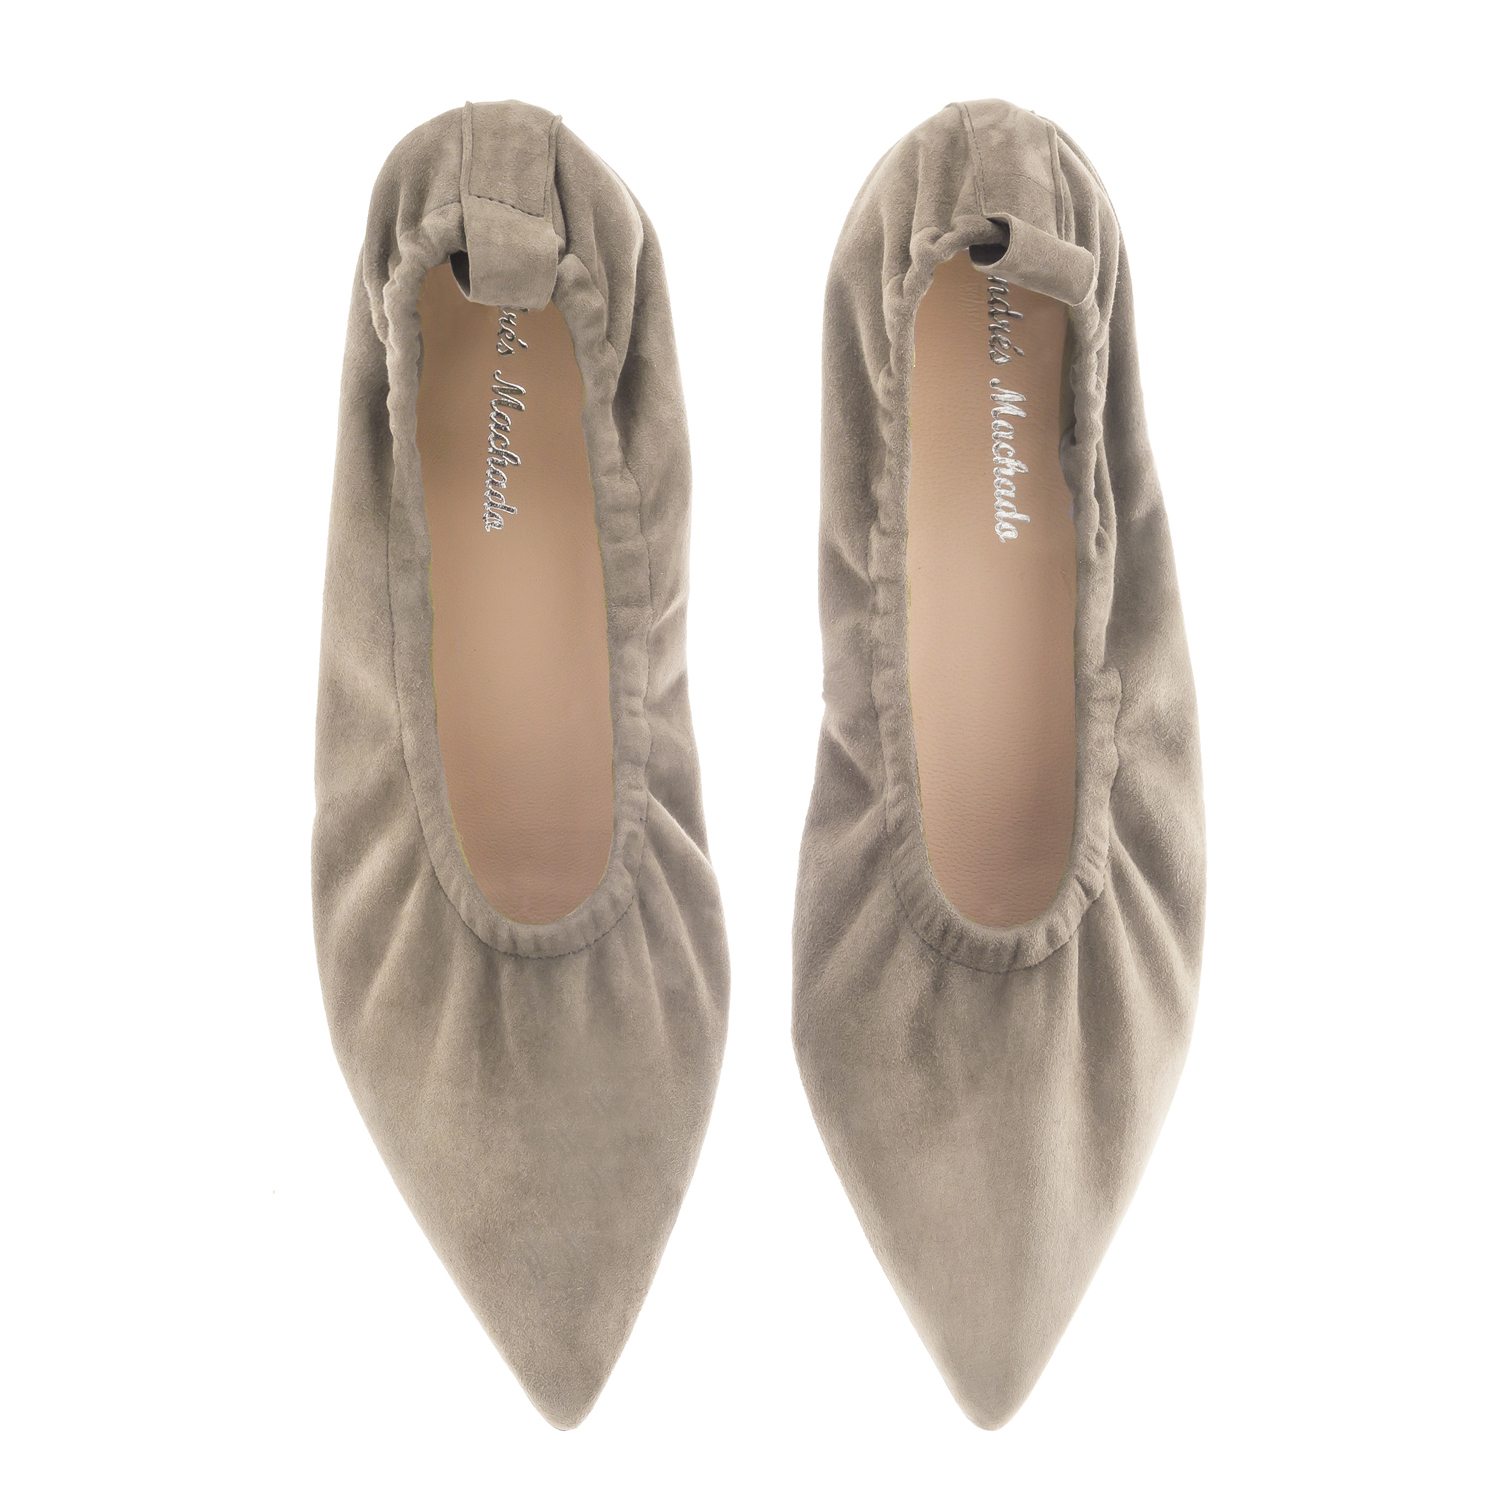 Elasticated Ballet Flats In Beige Suede Leather Exclusive Leather Collection Exclusive Women